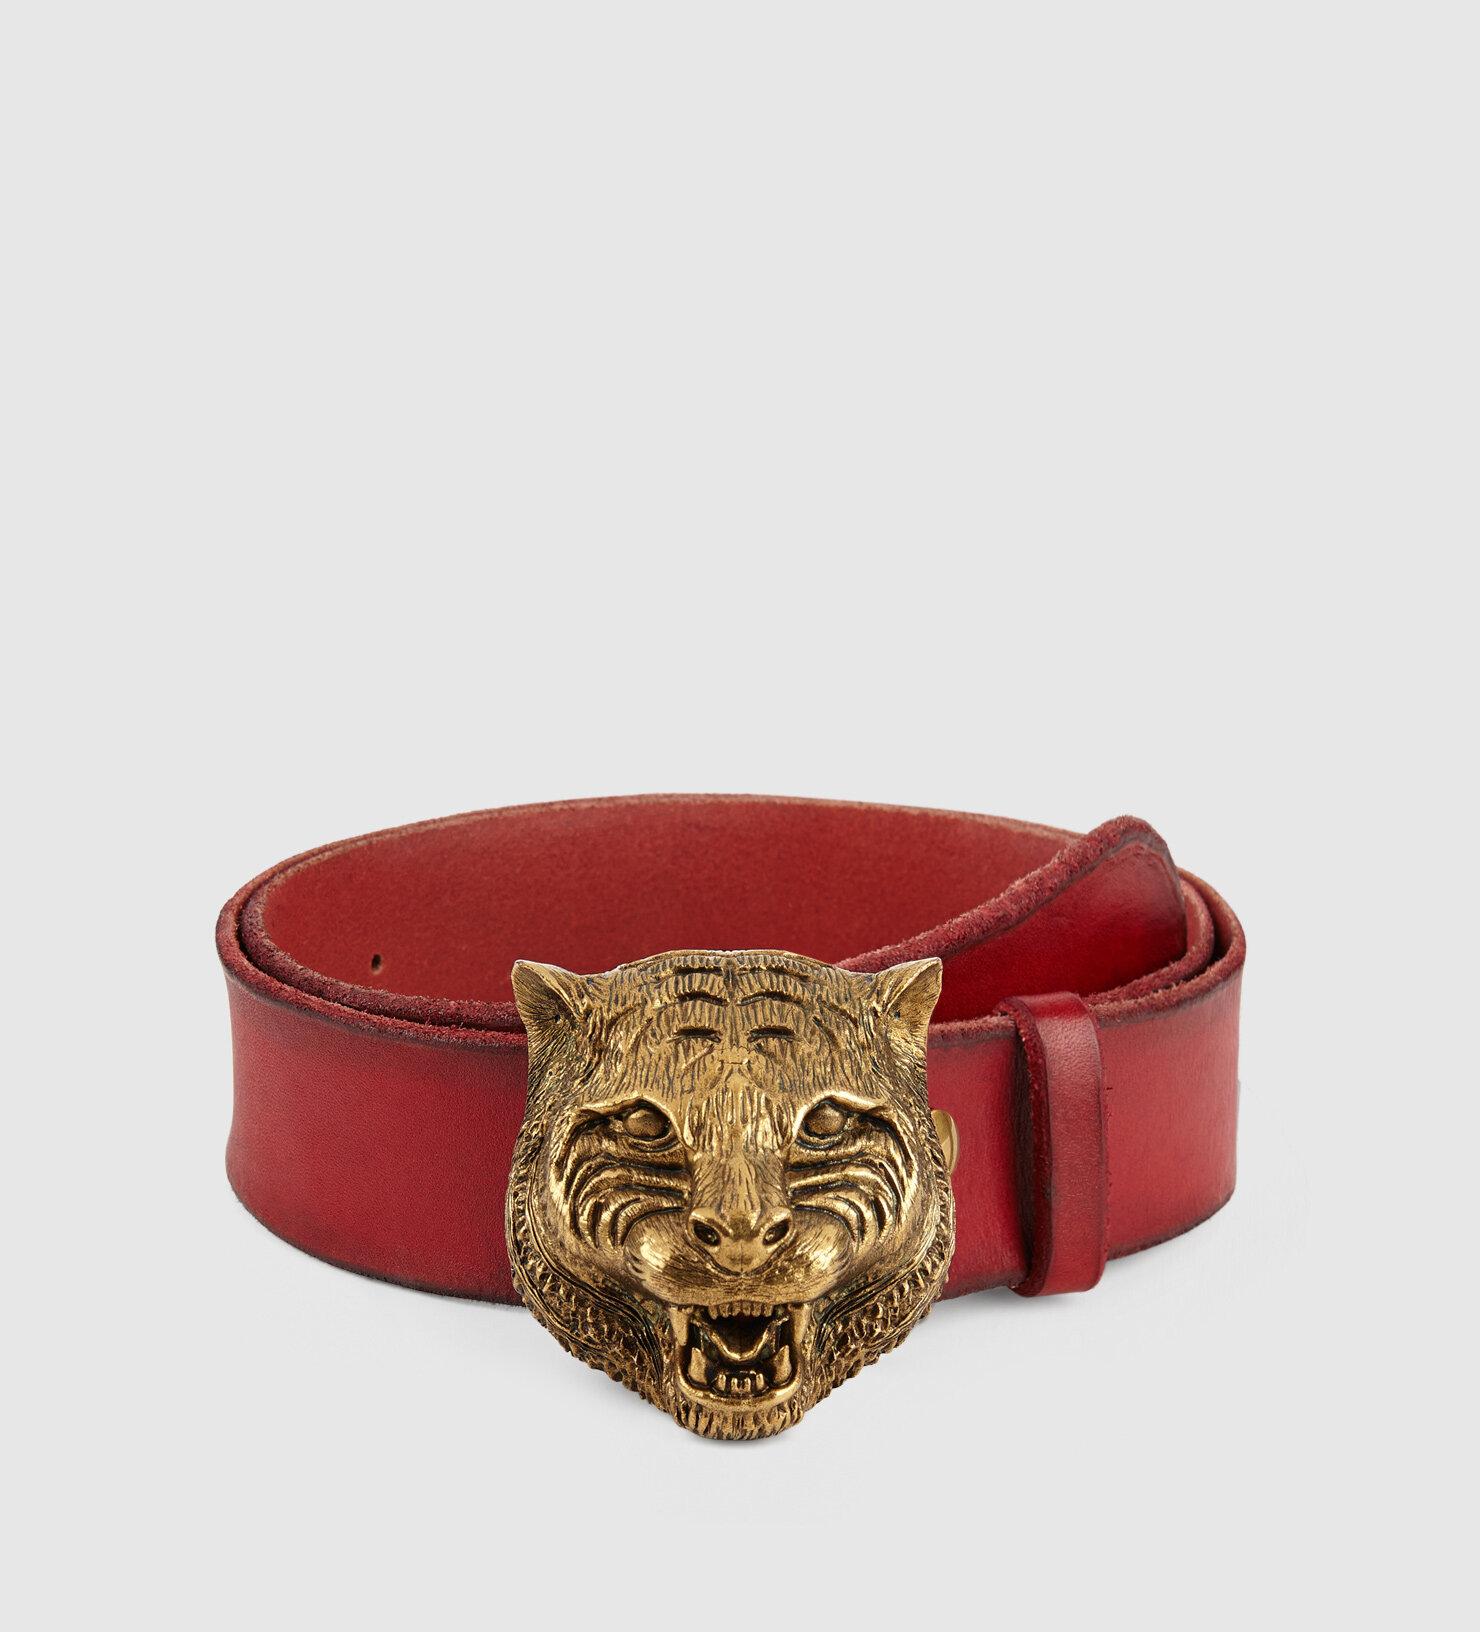 Gucci Leather Belt With Feline Buckle in Red.jpg